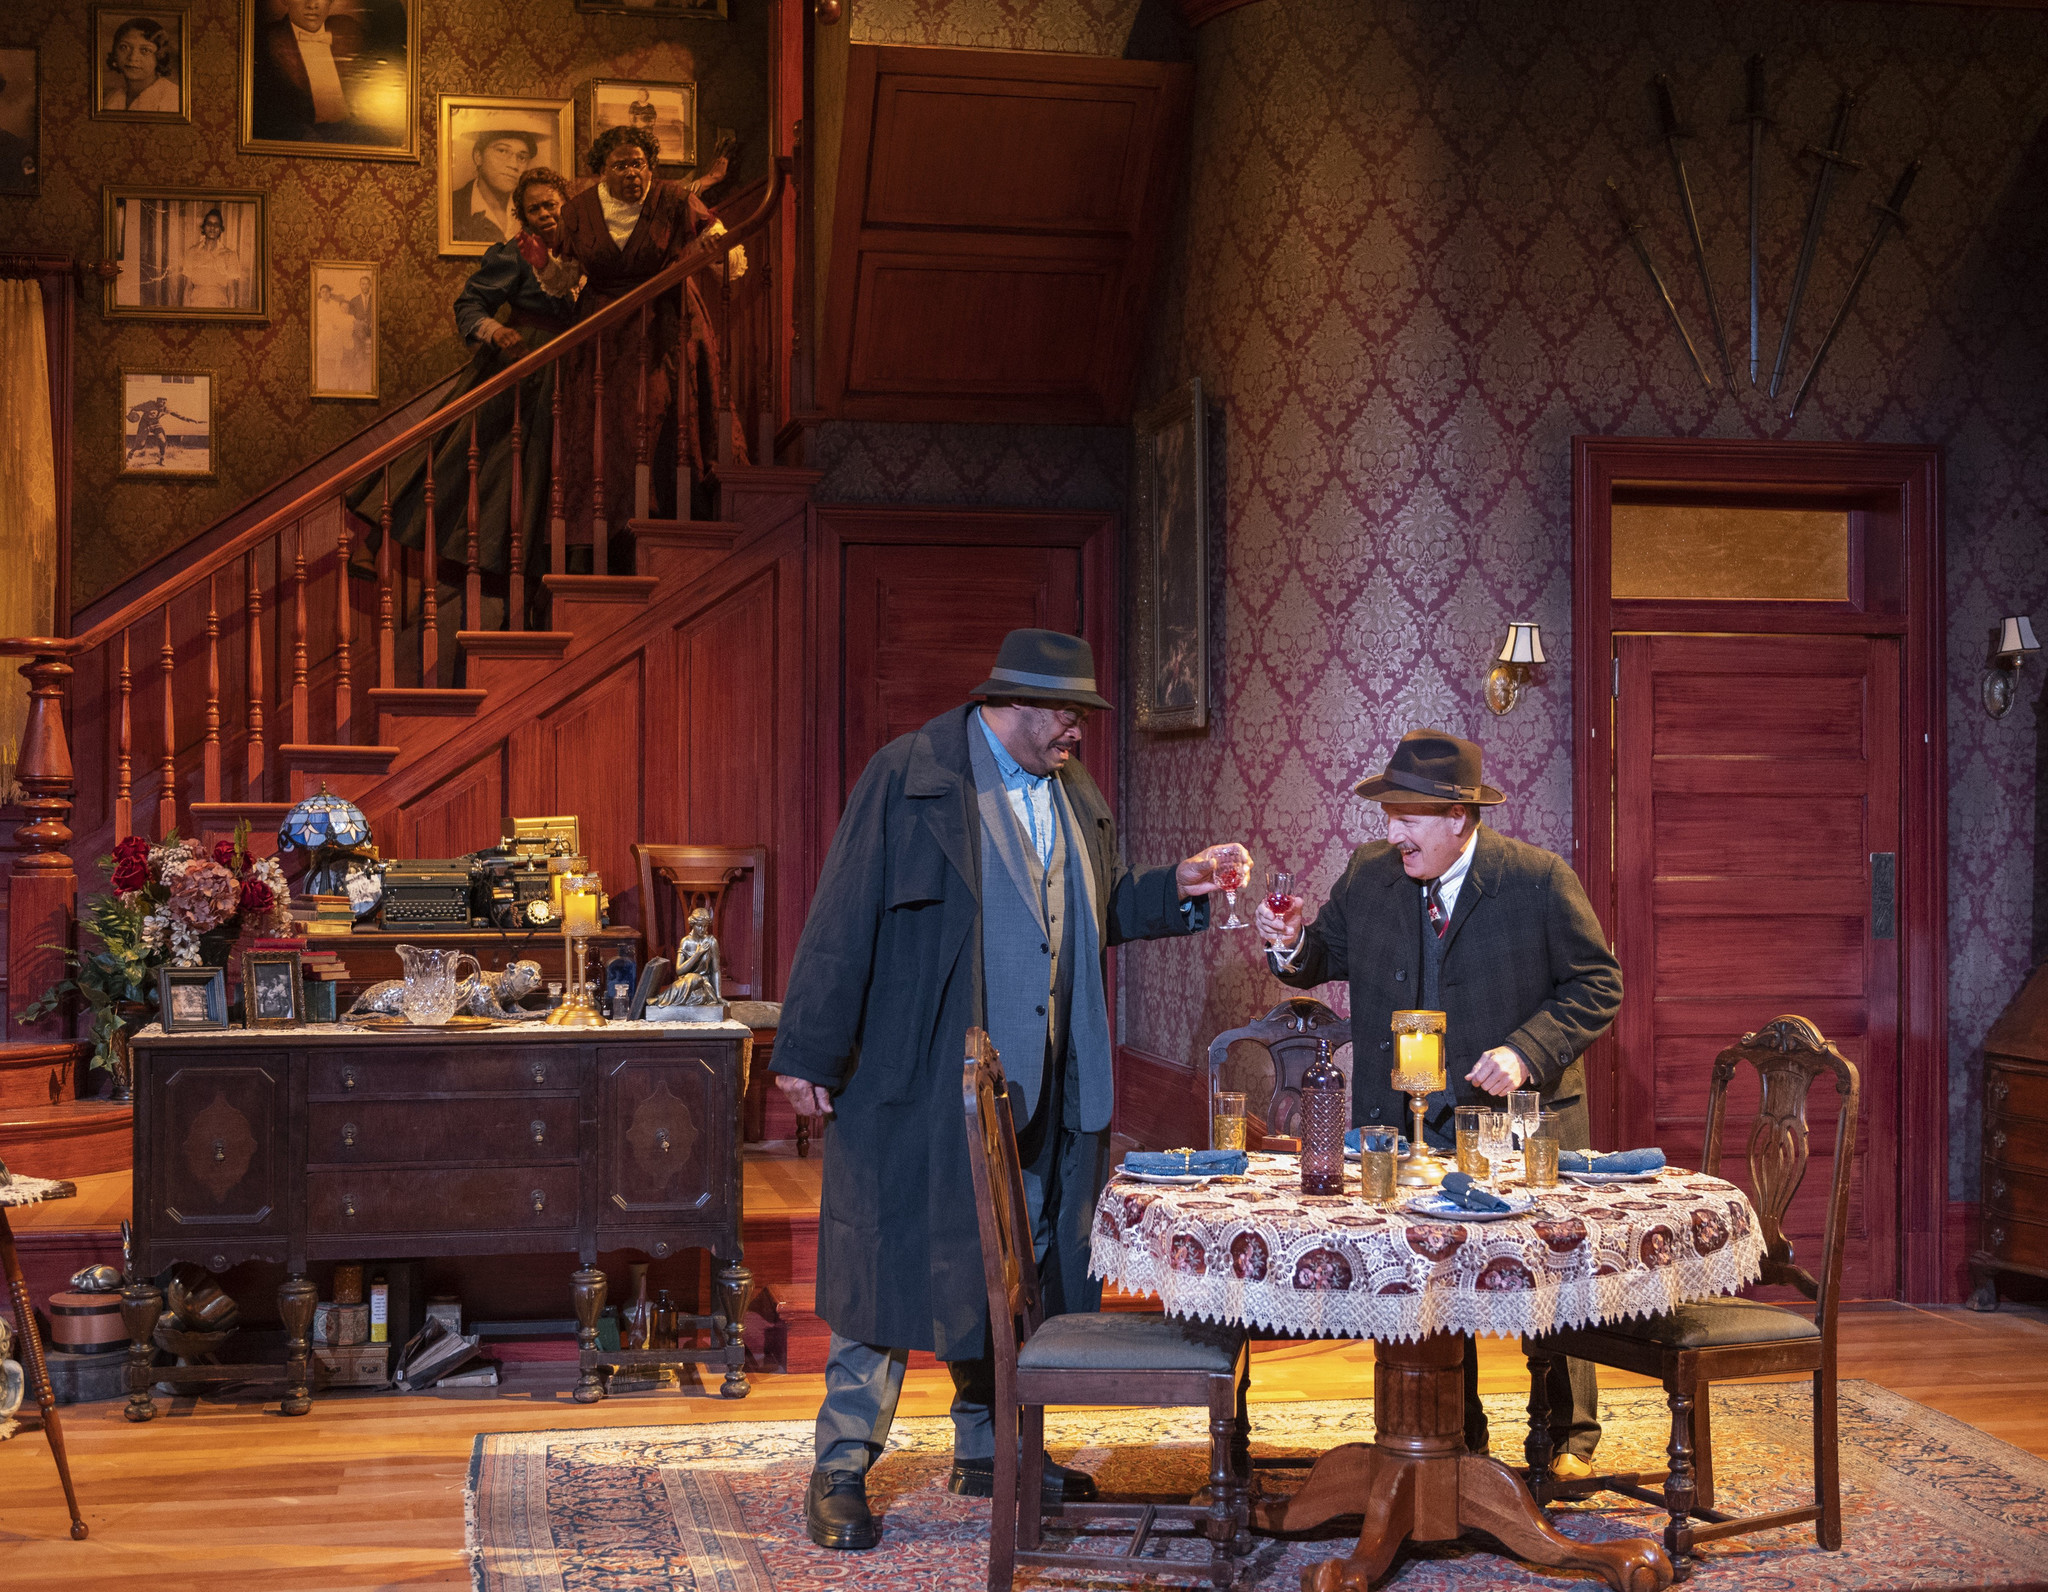 Review: Old comedy Arsenic and Old Lace is back at Court Theatre